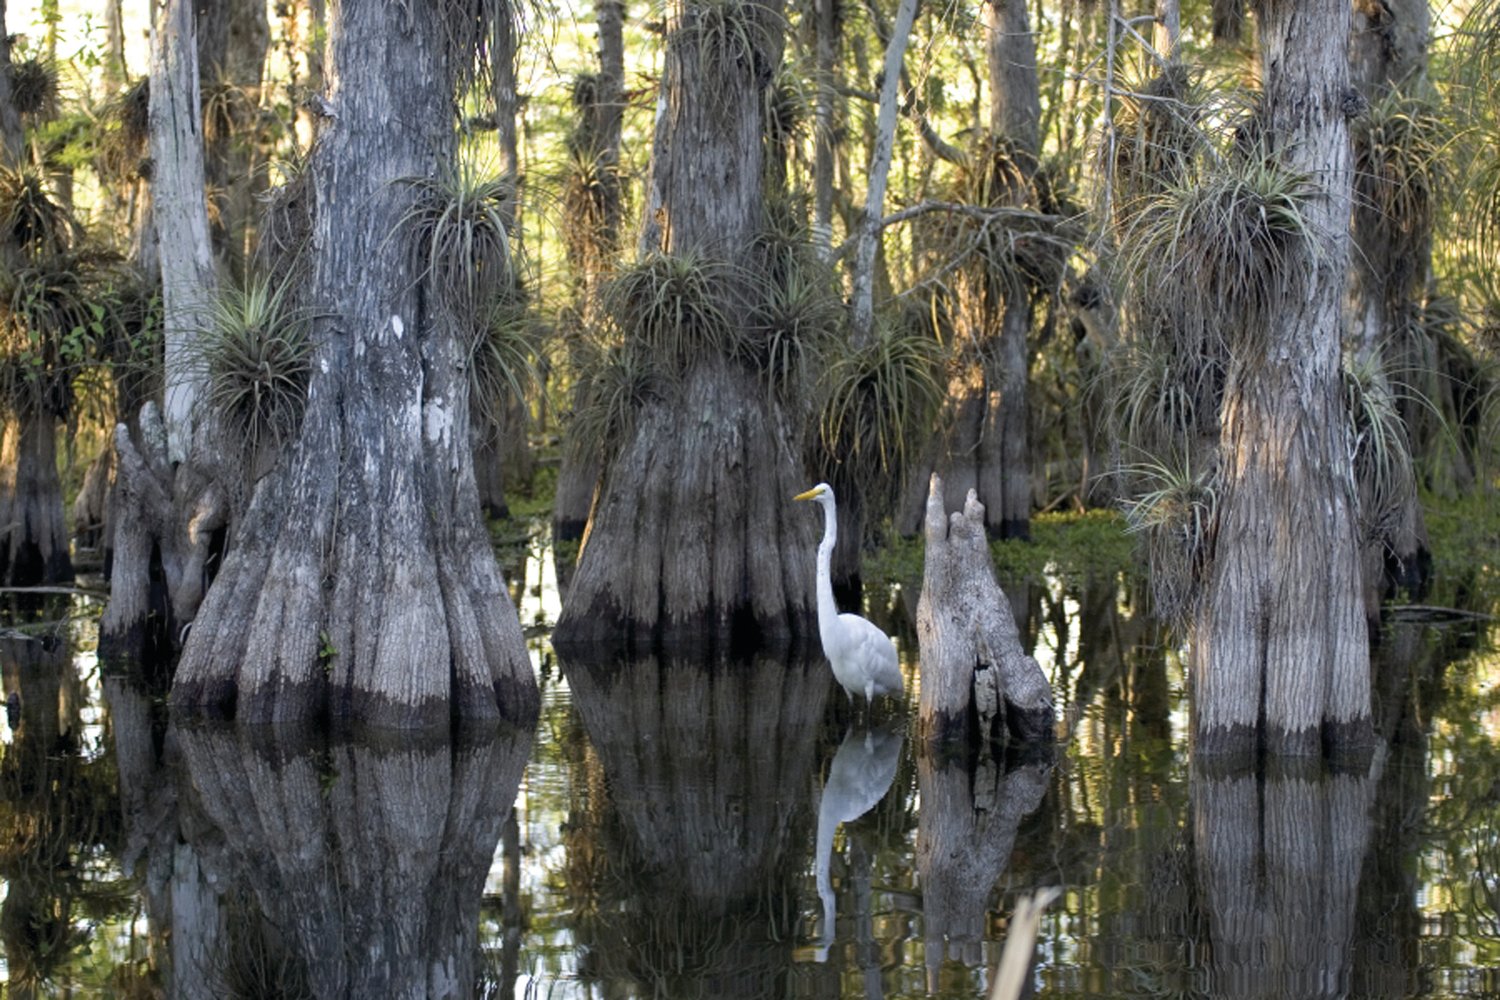 Wetlands are an important part of Florida’s natural ecosystem. This photo was taken in Everglades National Park.